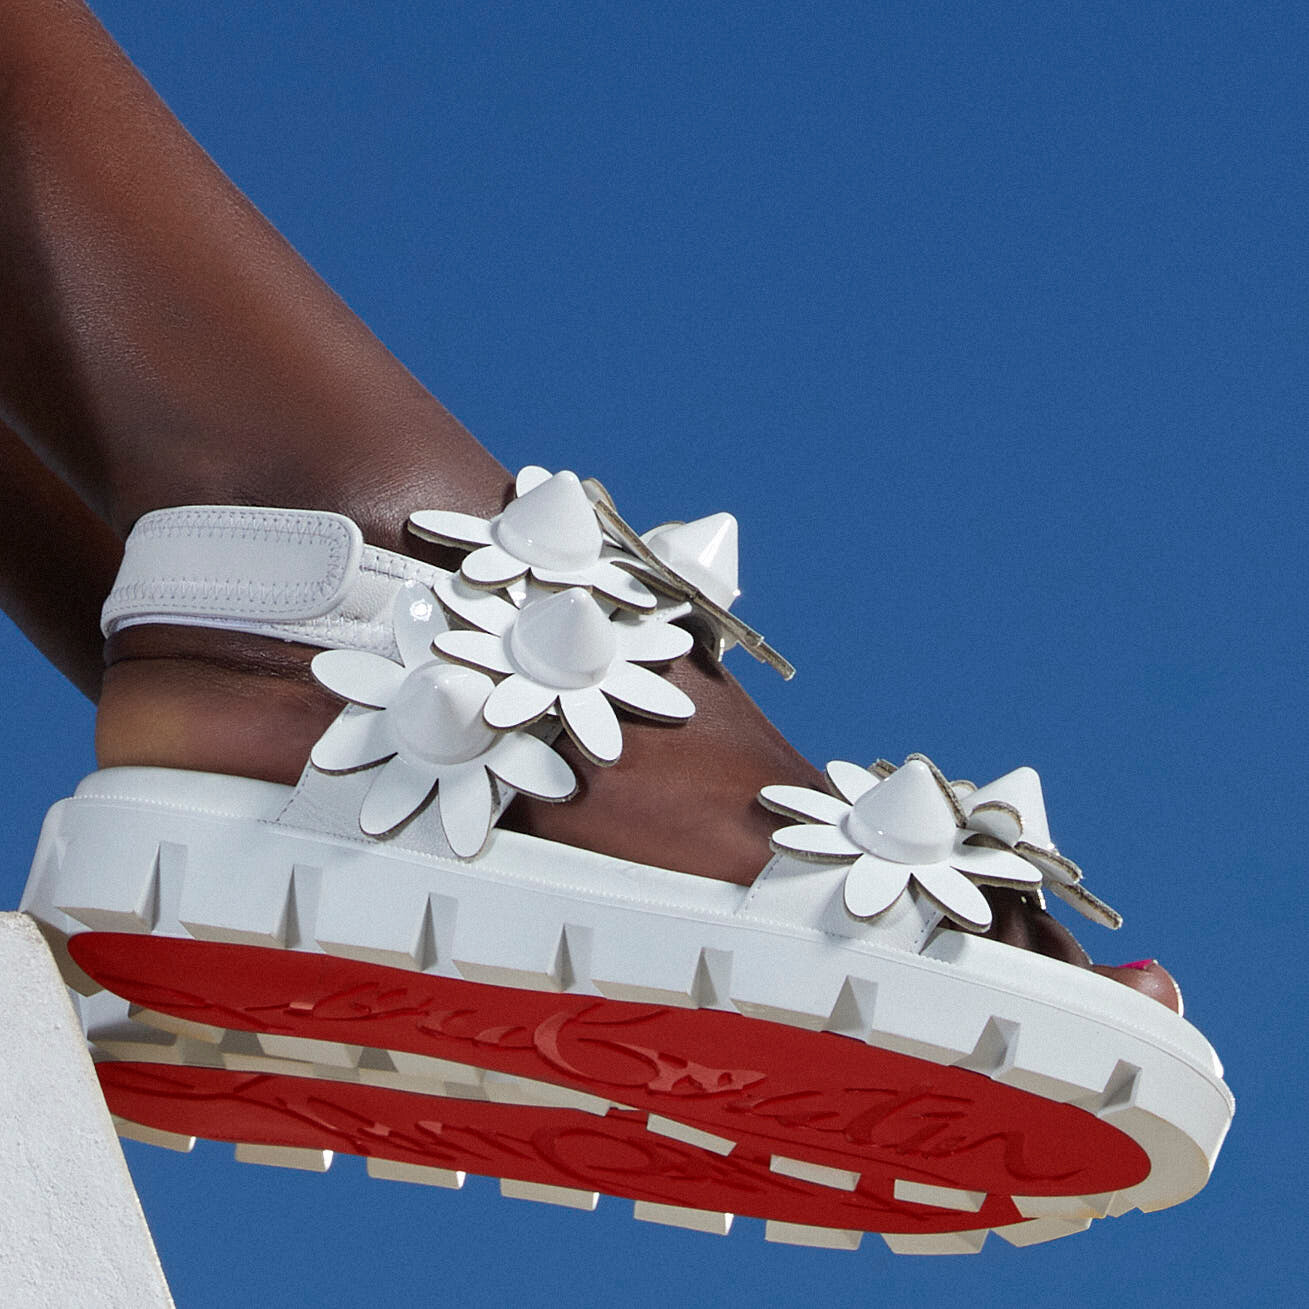 Daisy Spikes Cool - Sandals - Patent calf - White - Christian ...